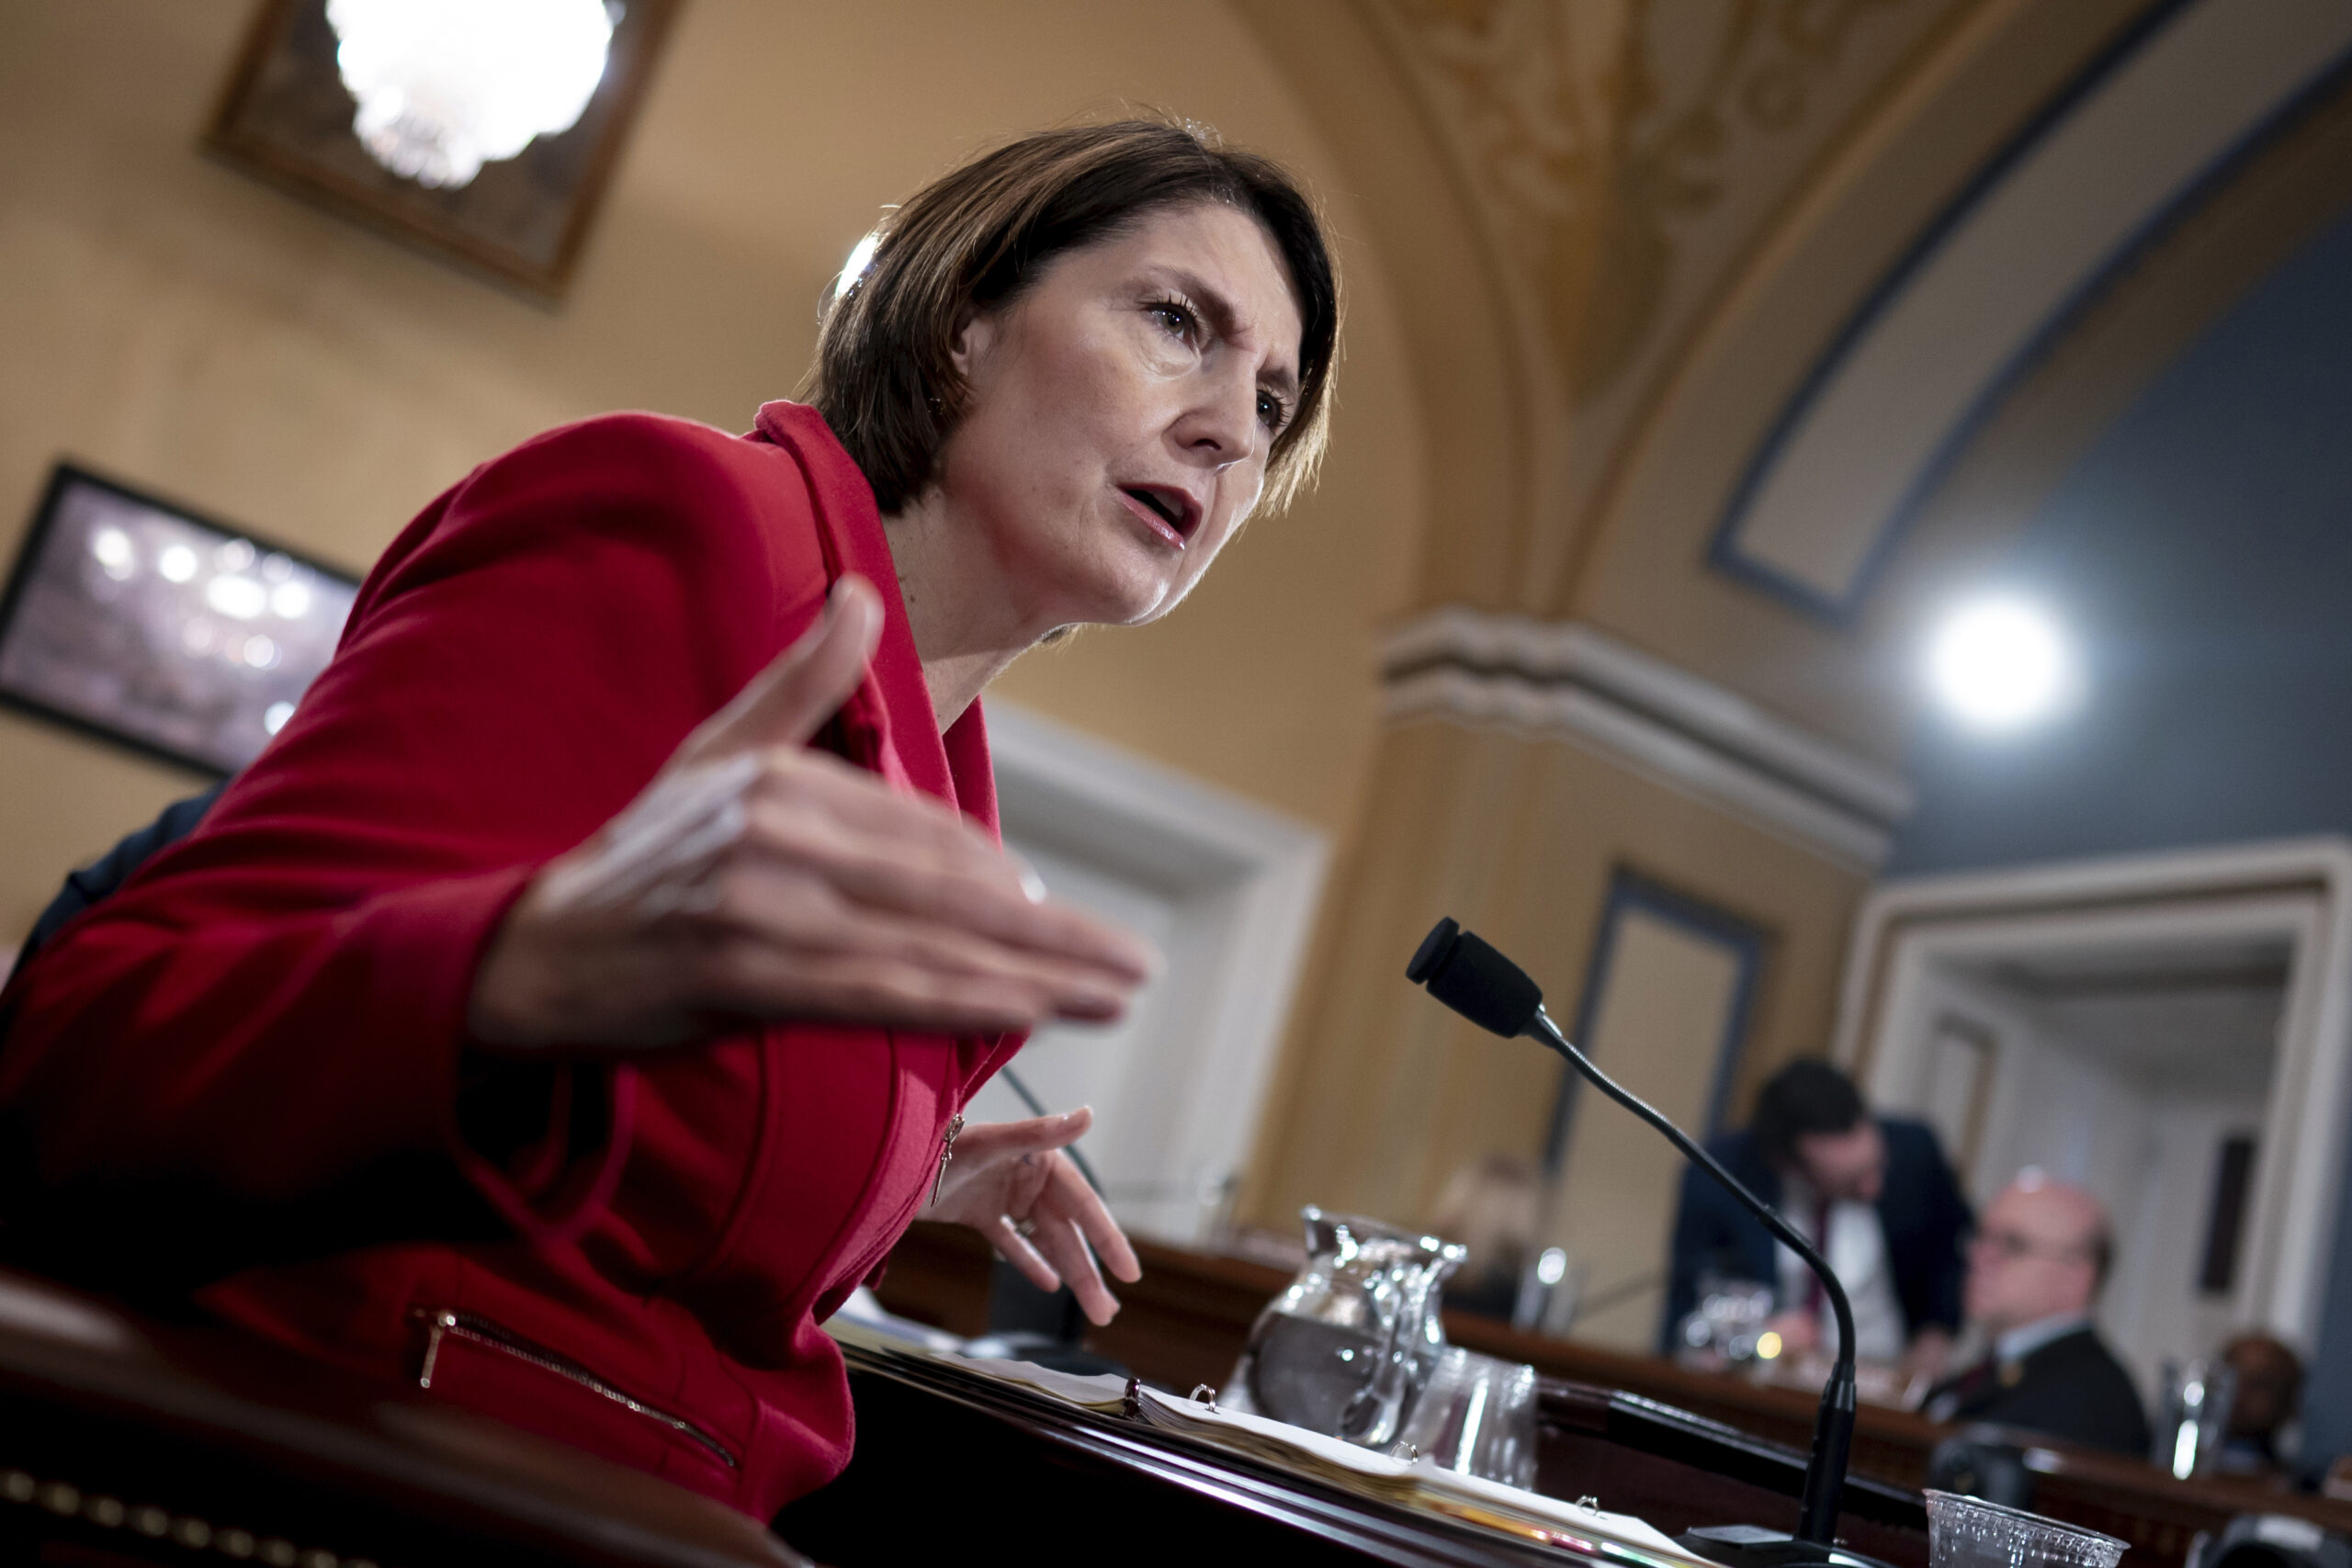 McMorris Rodgers steps down from House committee, won’t seek reelection